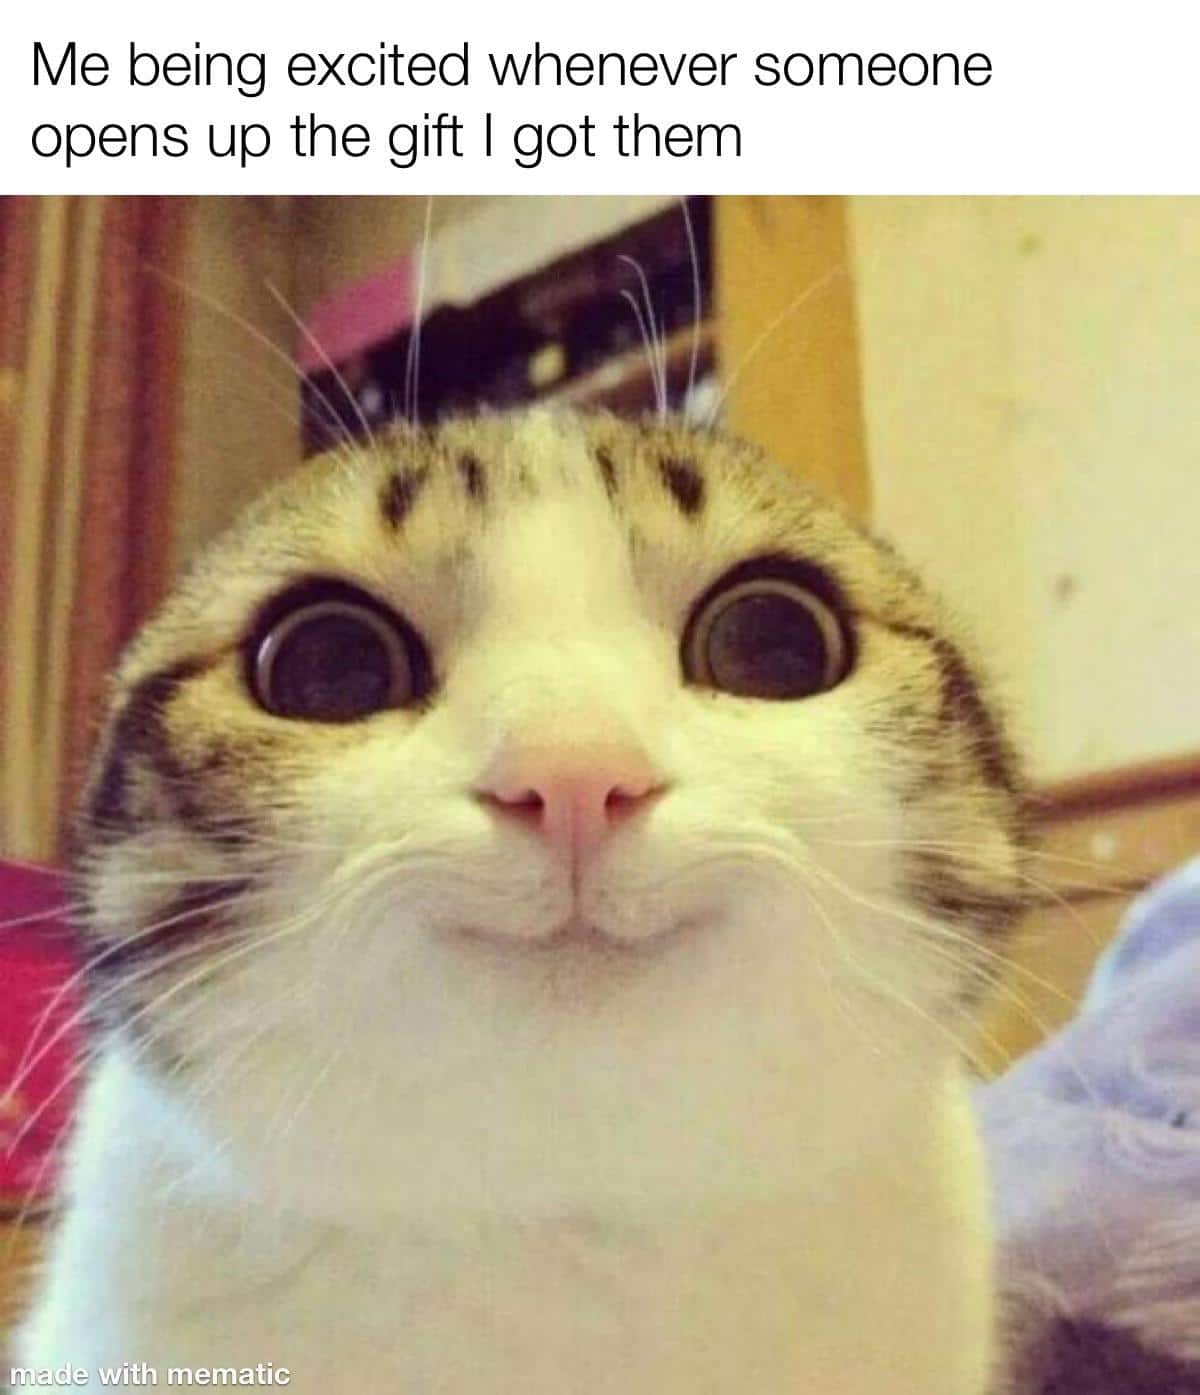 Wholesome memes,  Wholesome Memes Wholesome memes,  text: Me being excited whenever someone opens up the gift I got them 'dé with mematic 